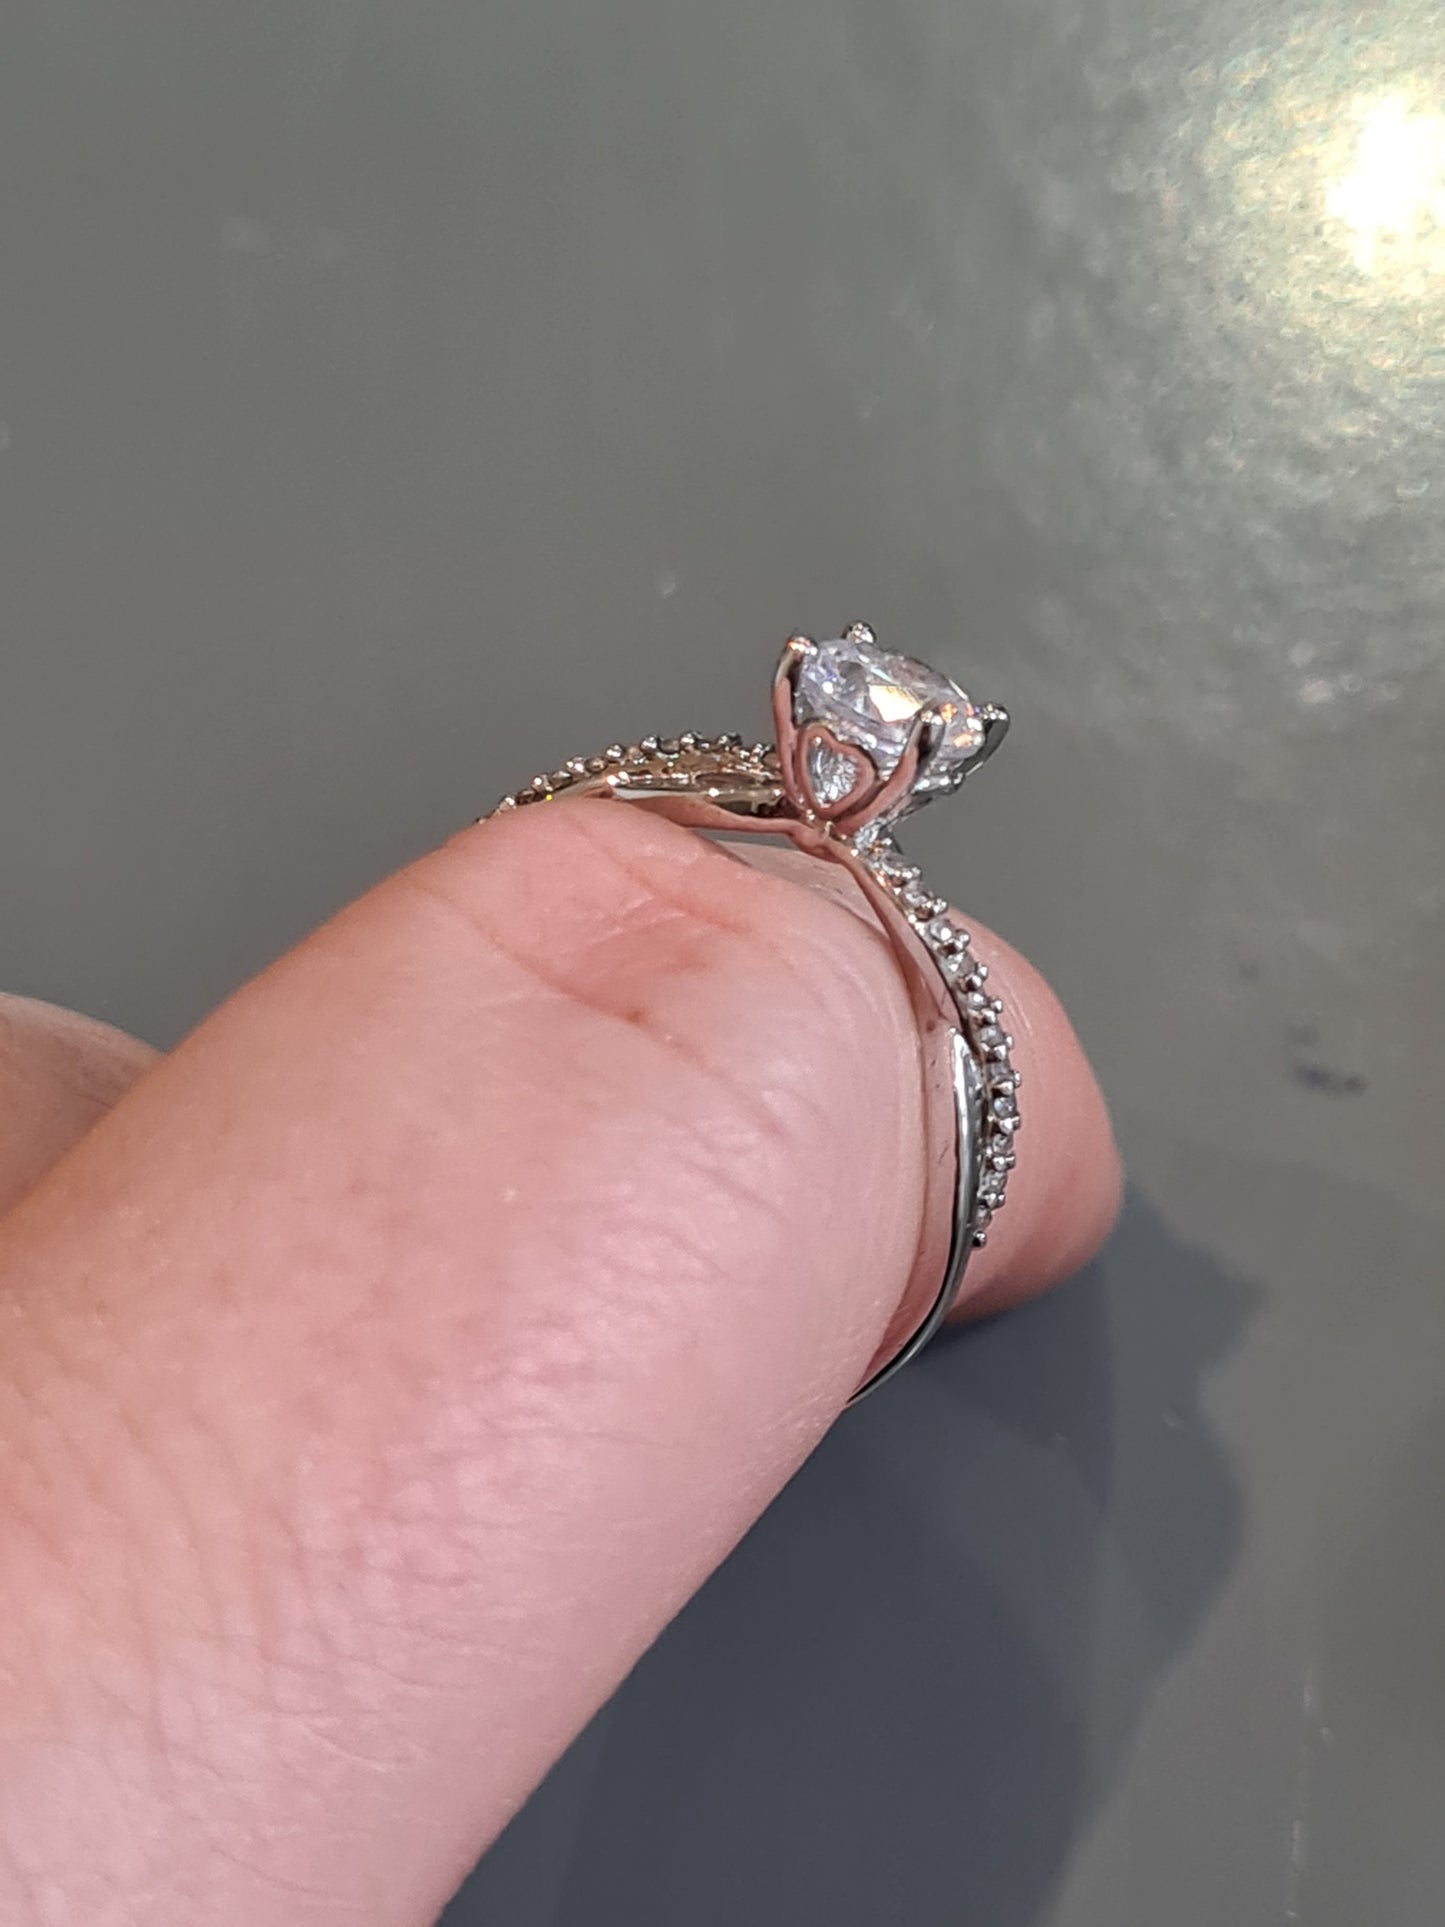 NOT Pandora But The Most Beautiful CZ Ring in Size 58